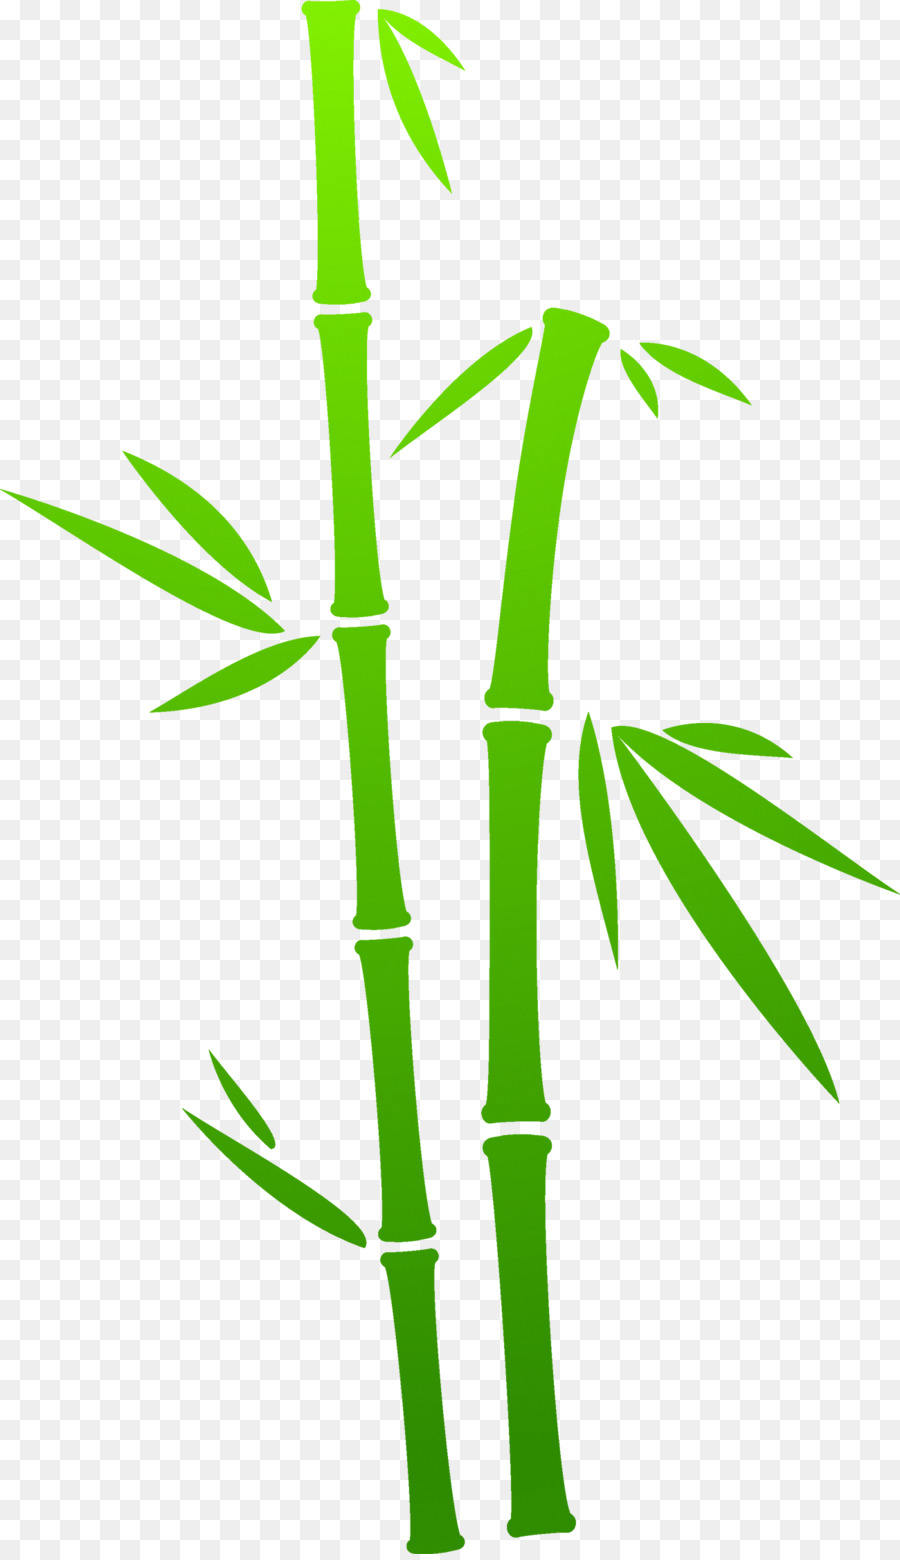 Bamboo Painting Green - Green Bamboo png download - 1300*2244 - Free Transparent Bamboo png Download.